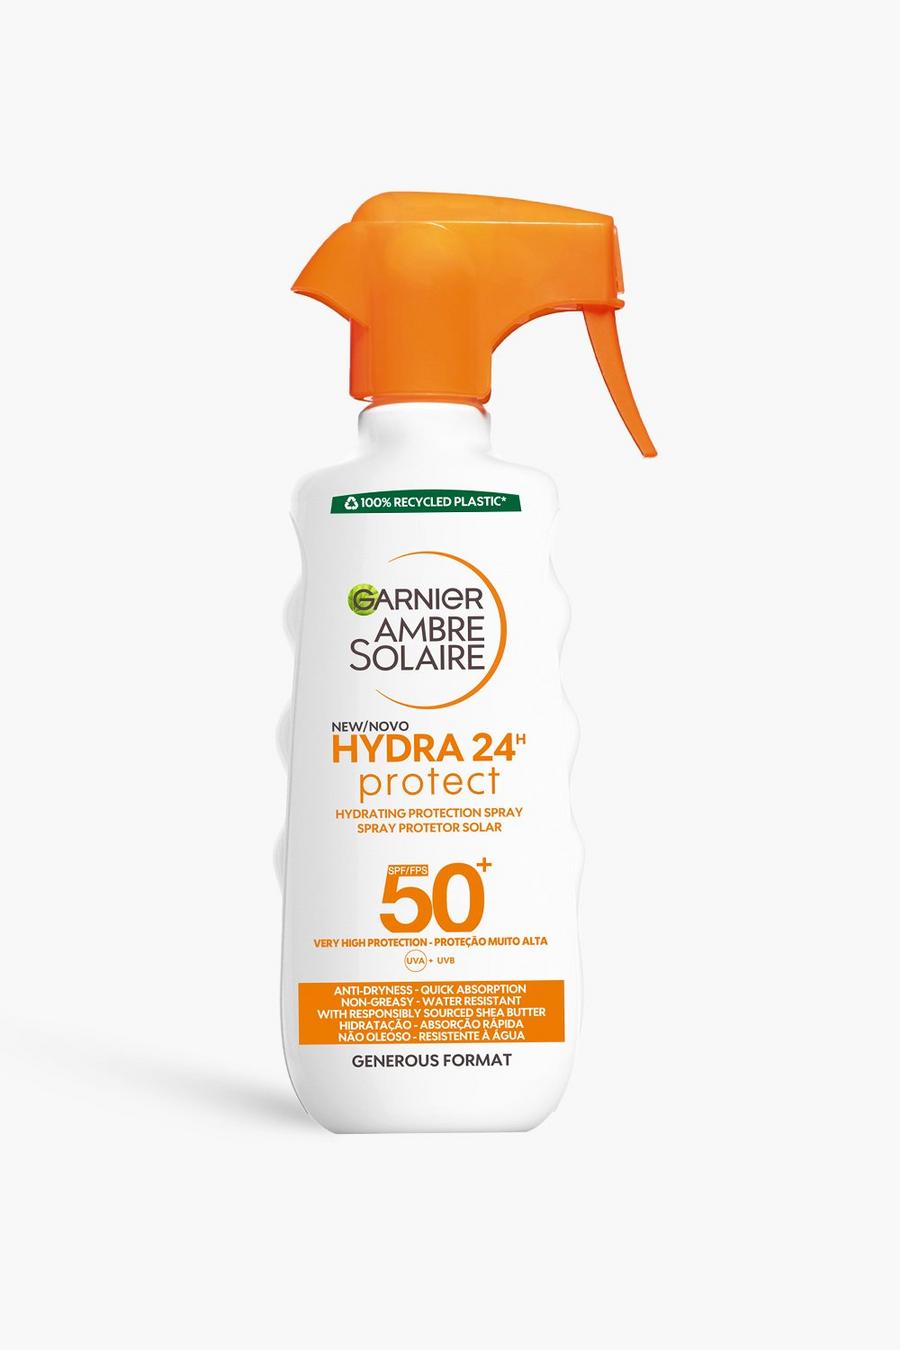 White Garnier Ambre Solaire Hydra 24 Hour Protect Hydrating Protection Spray SPF50, UVA & UVB Protection, 300ml (SAVE 31%)